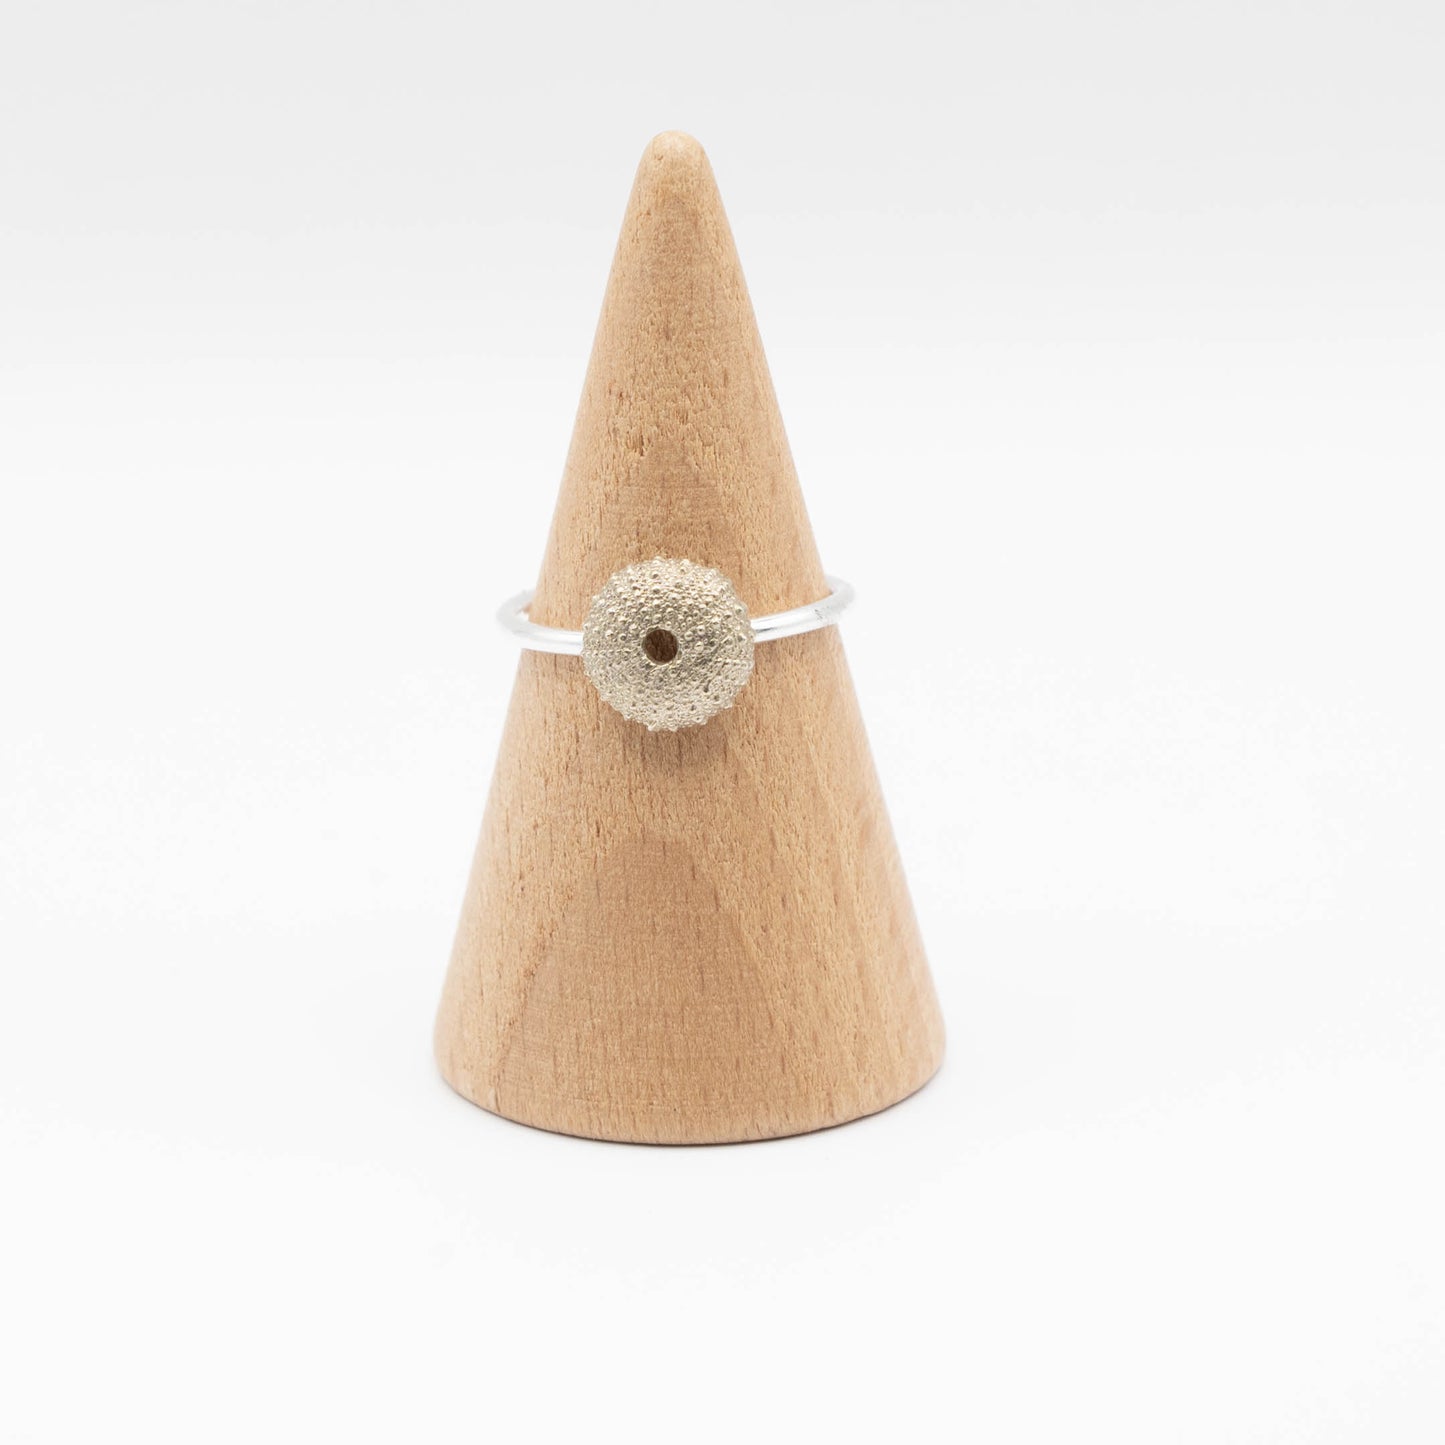 brass sea urchin with silver band ring, displayed on a wooden cone